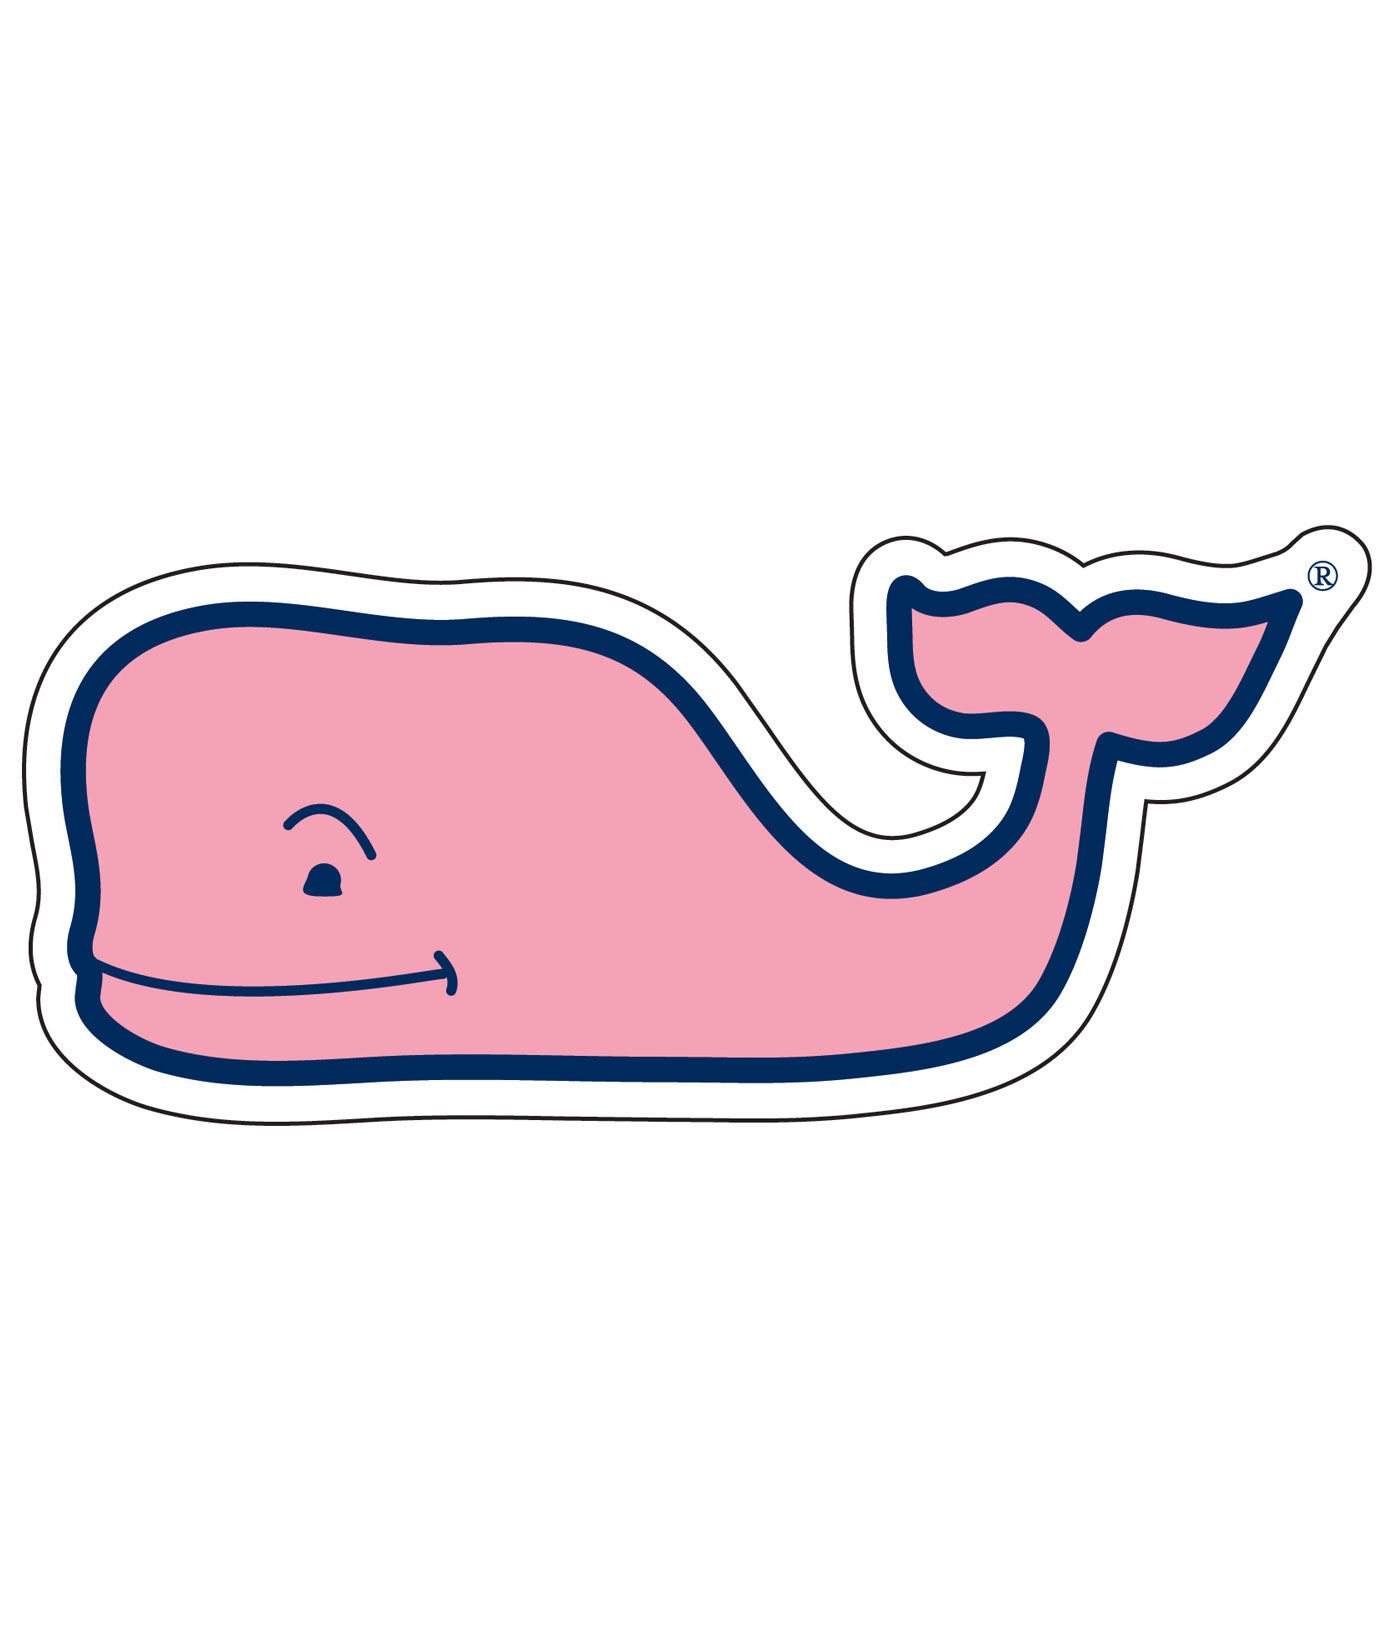 NEW Vineyard Vines Christmas Lights Whale Sticker Decal 